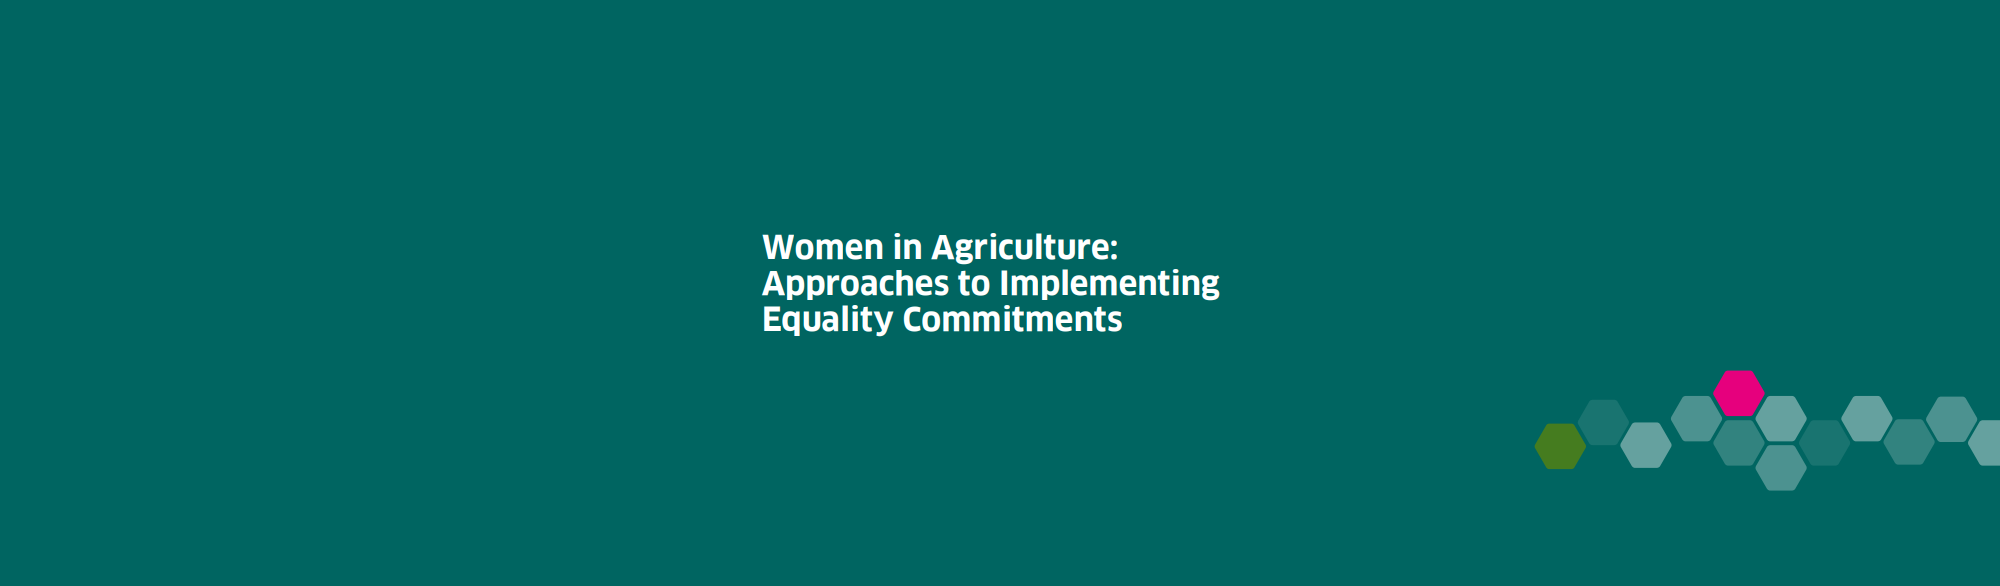 Women In Agriculture Banner